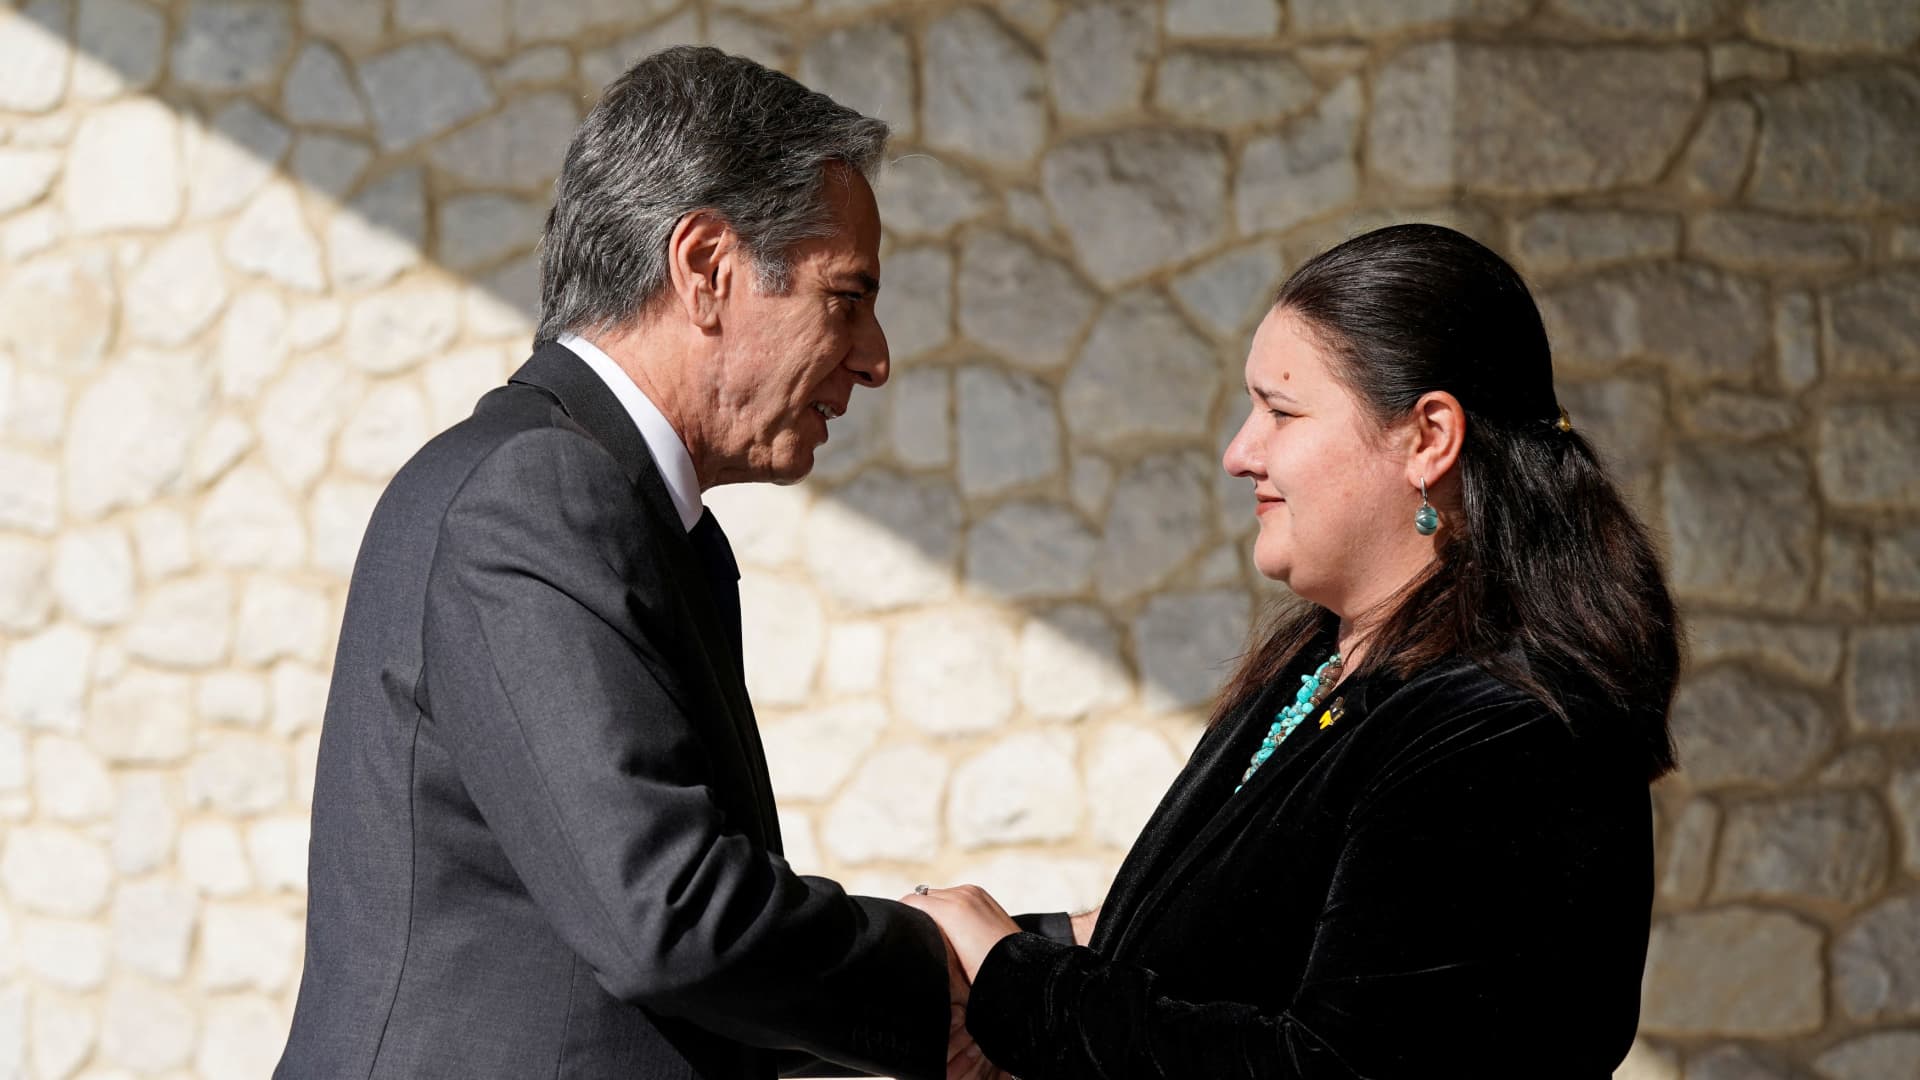 U.S. Secretary of State Antony Blinken is greeted by Ukrainian Ambassador to the U.S. Oksana Markarova during a visit to Ukrainian Catholic National Shrine of the Holy Family to show support for the Ukrainian people amid the ongoing Russian invasion, in Washington, U.S., March 2, 2022.